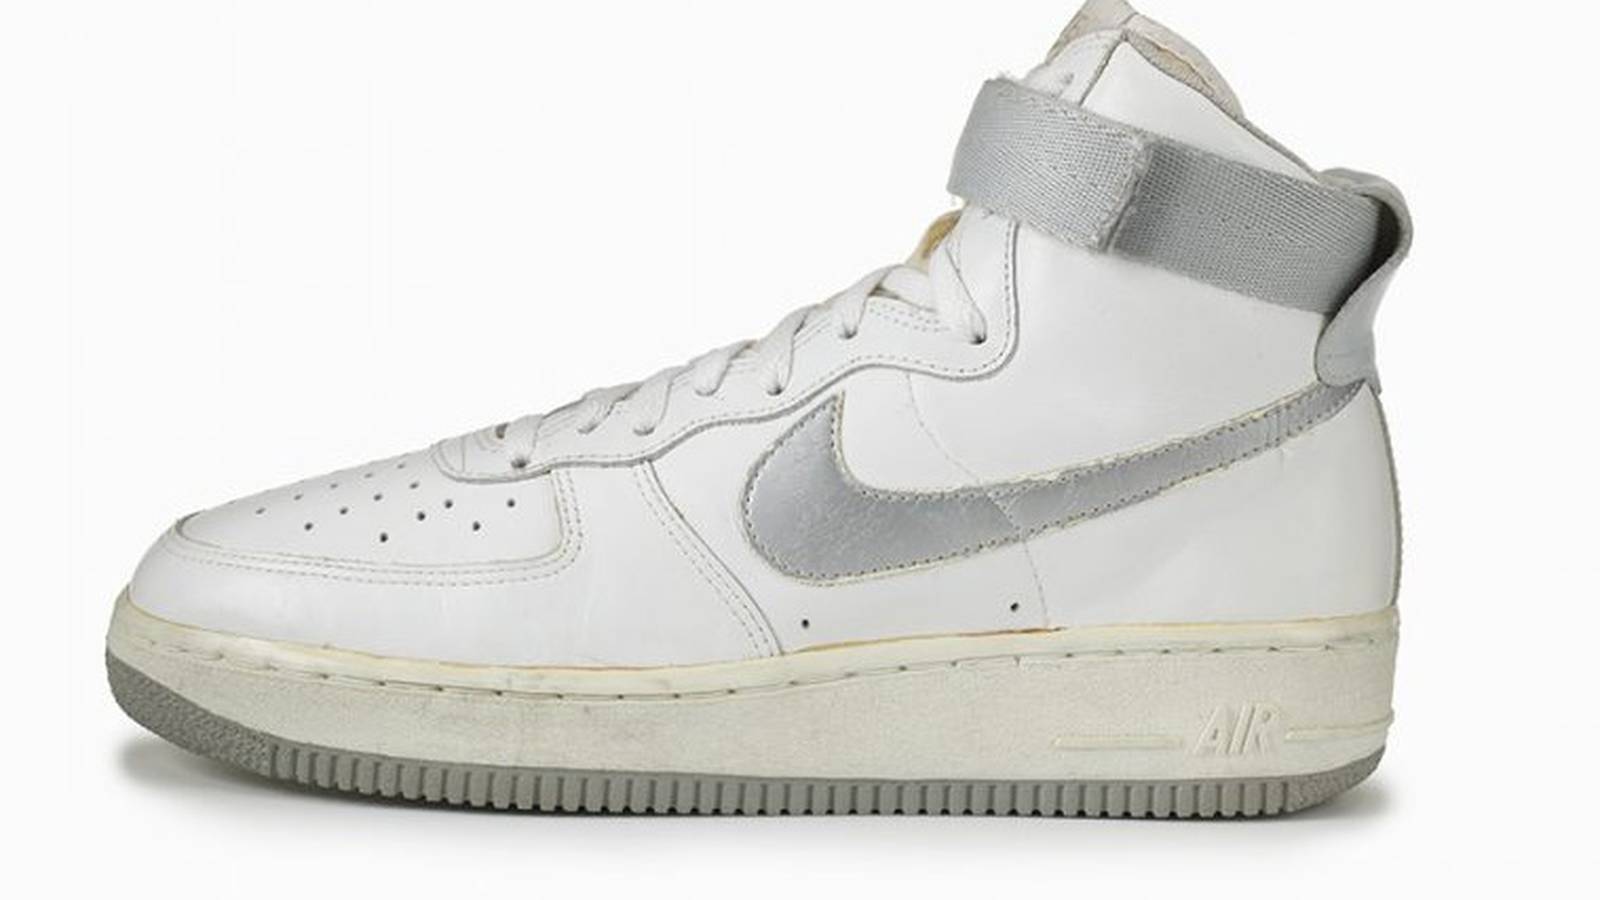 Cesta eficaz Facturable Design Moment: Nike Air Force 1, c 1982 – The Irish Times